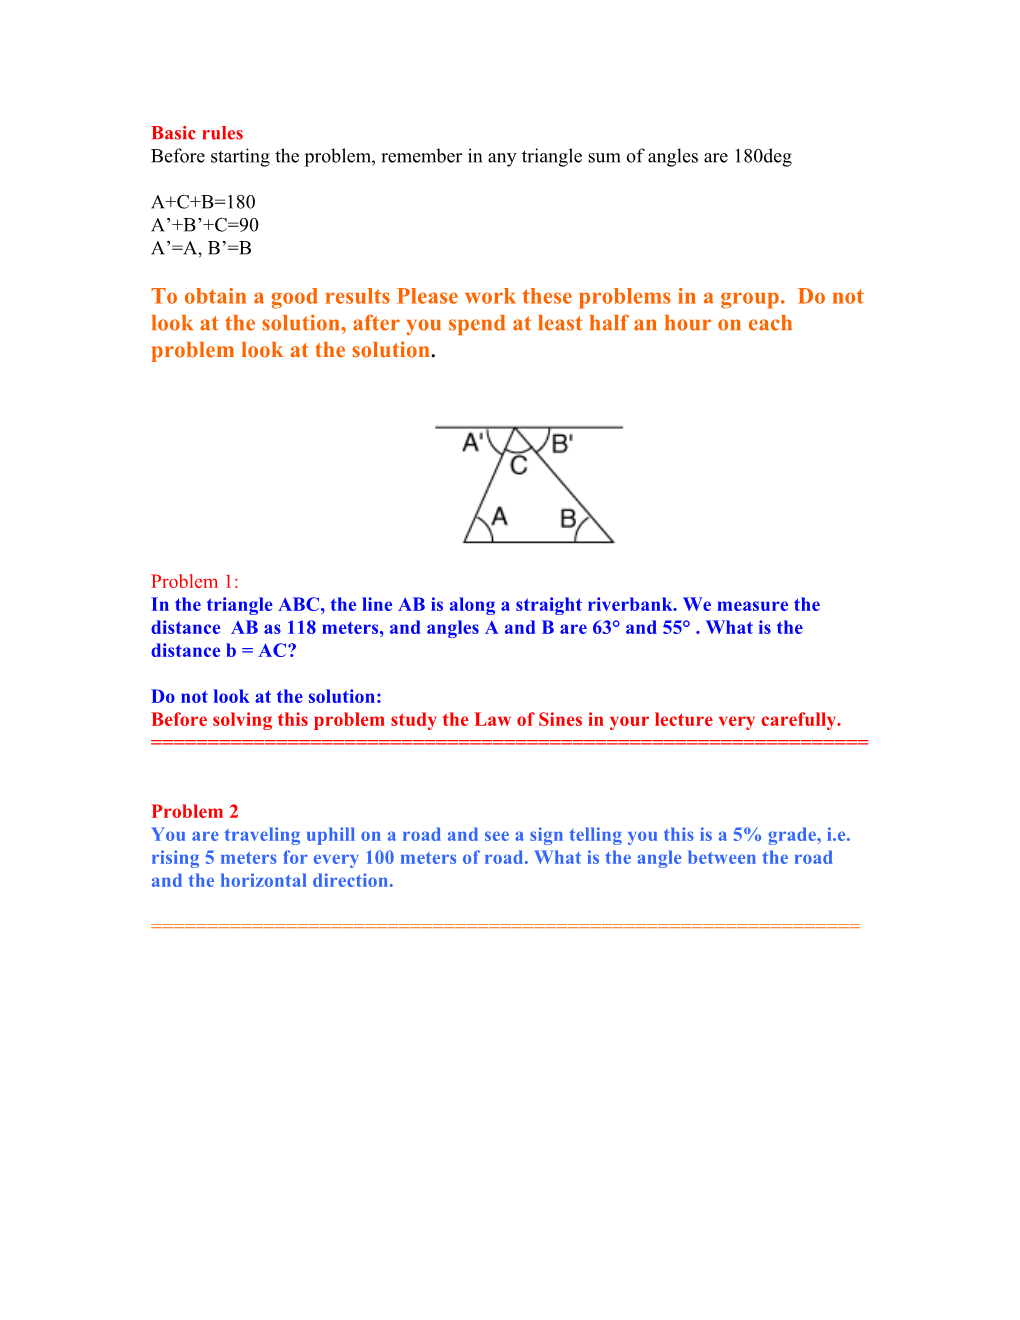 Before Starting the Problem, Remember in Any Triangle Sum of Angles Are 180Deg